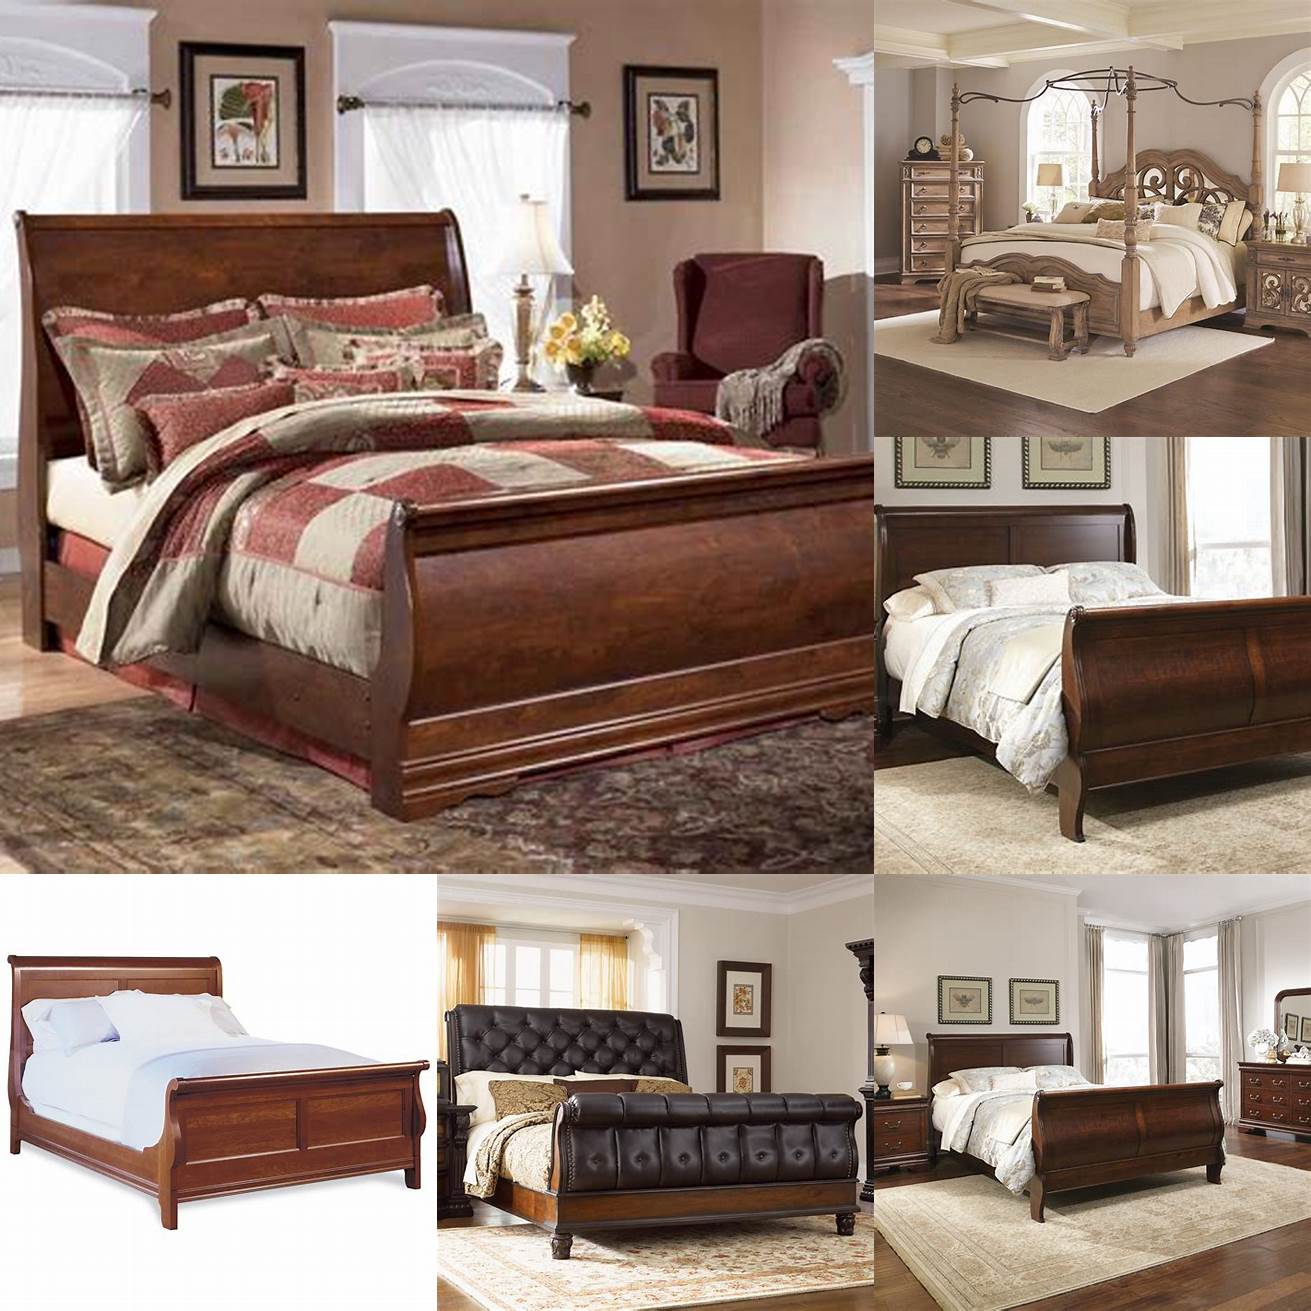 Image 5 A Sleigh Bed Queen with a canopy